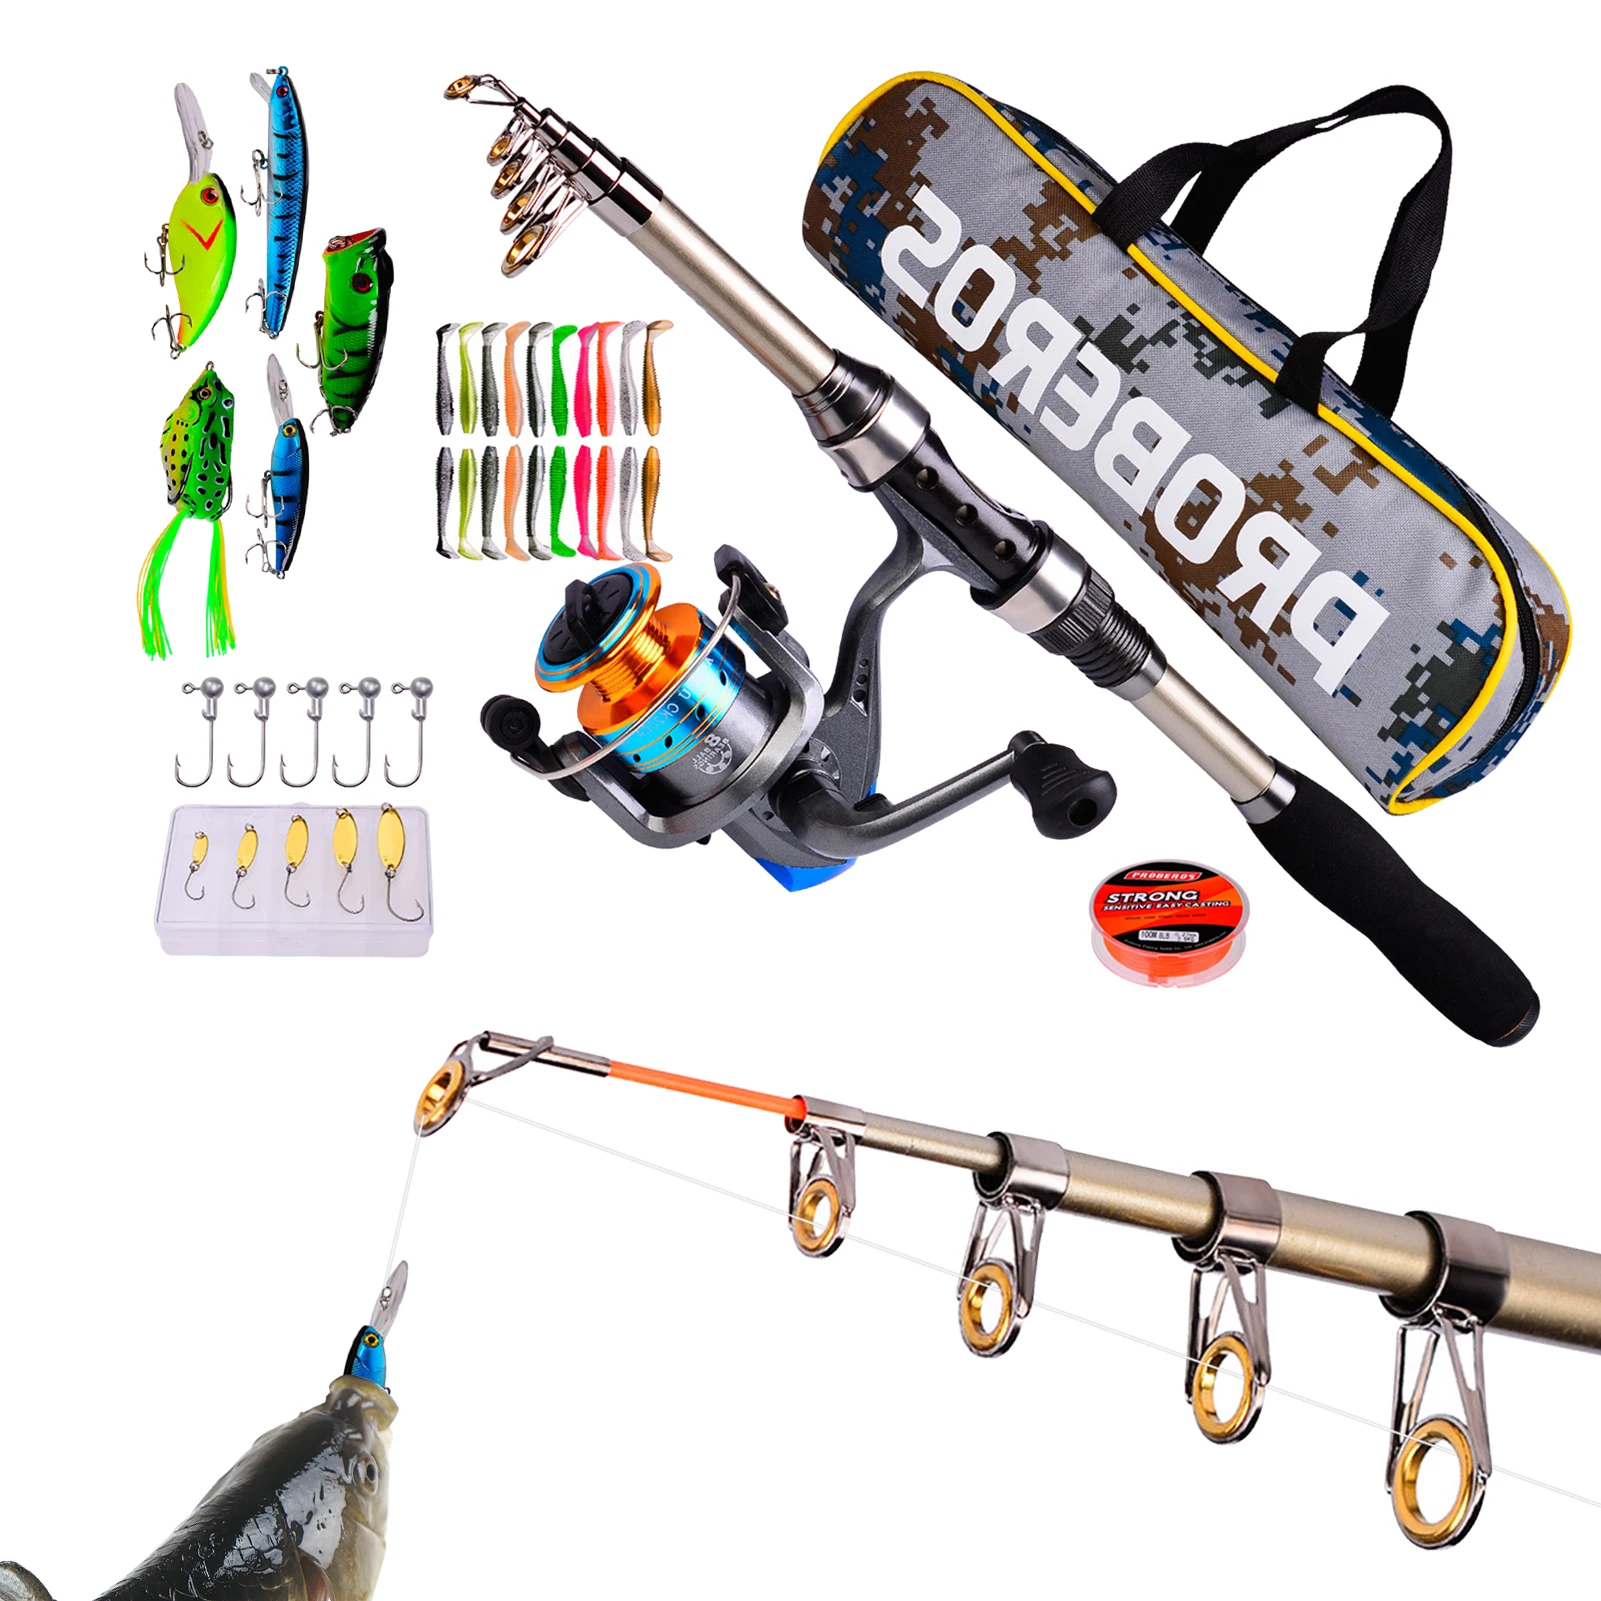 

Portable Travel Fishing Combo 1.8M Casting Fishing Rod And Spinning Reel Baits Lure Set Fishing Line Lures Bag Accessories